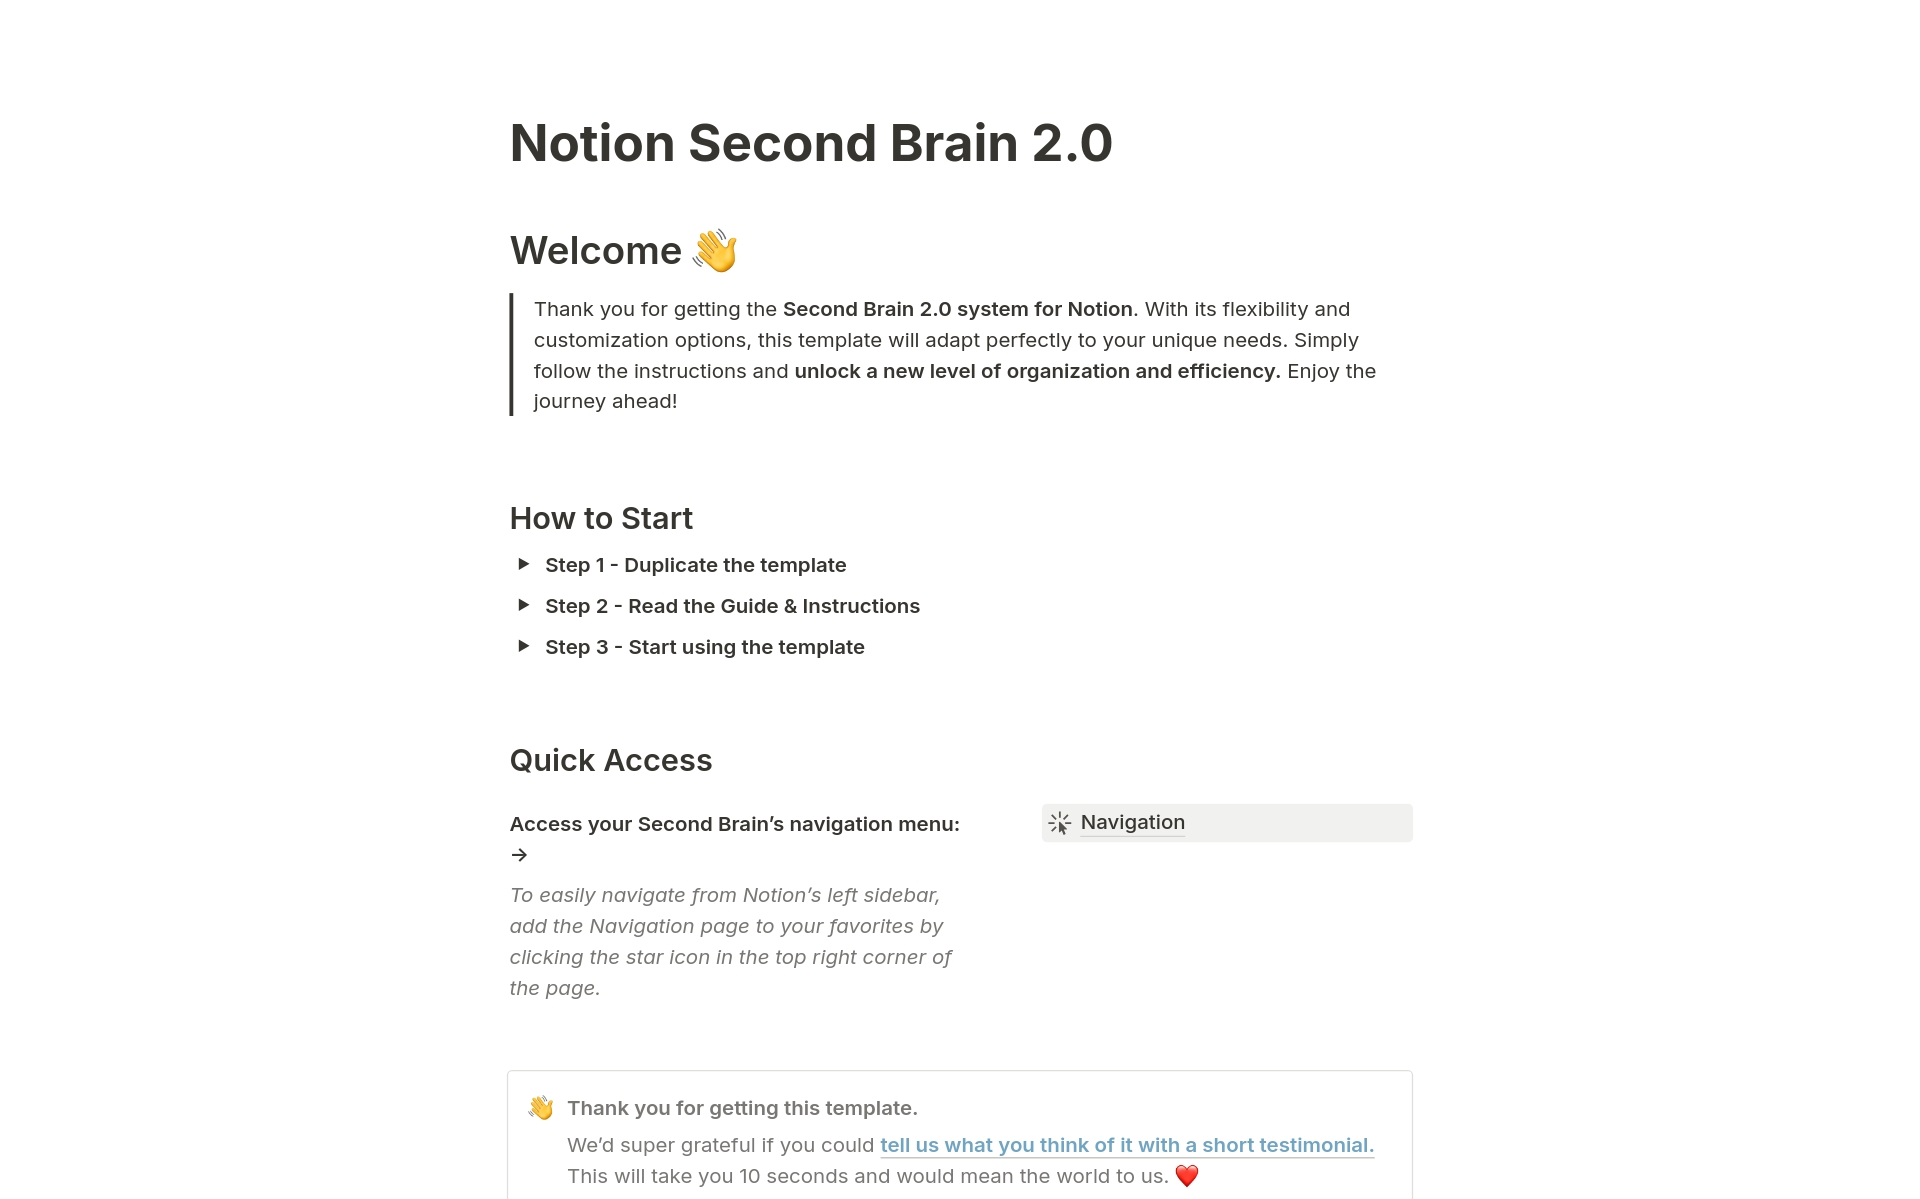 This Notion Second Brain template is your streamlined system to capture and organize all your notes, tasks, projects and resources.